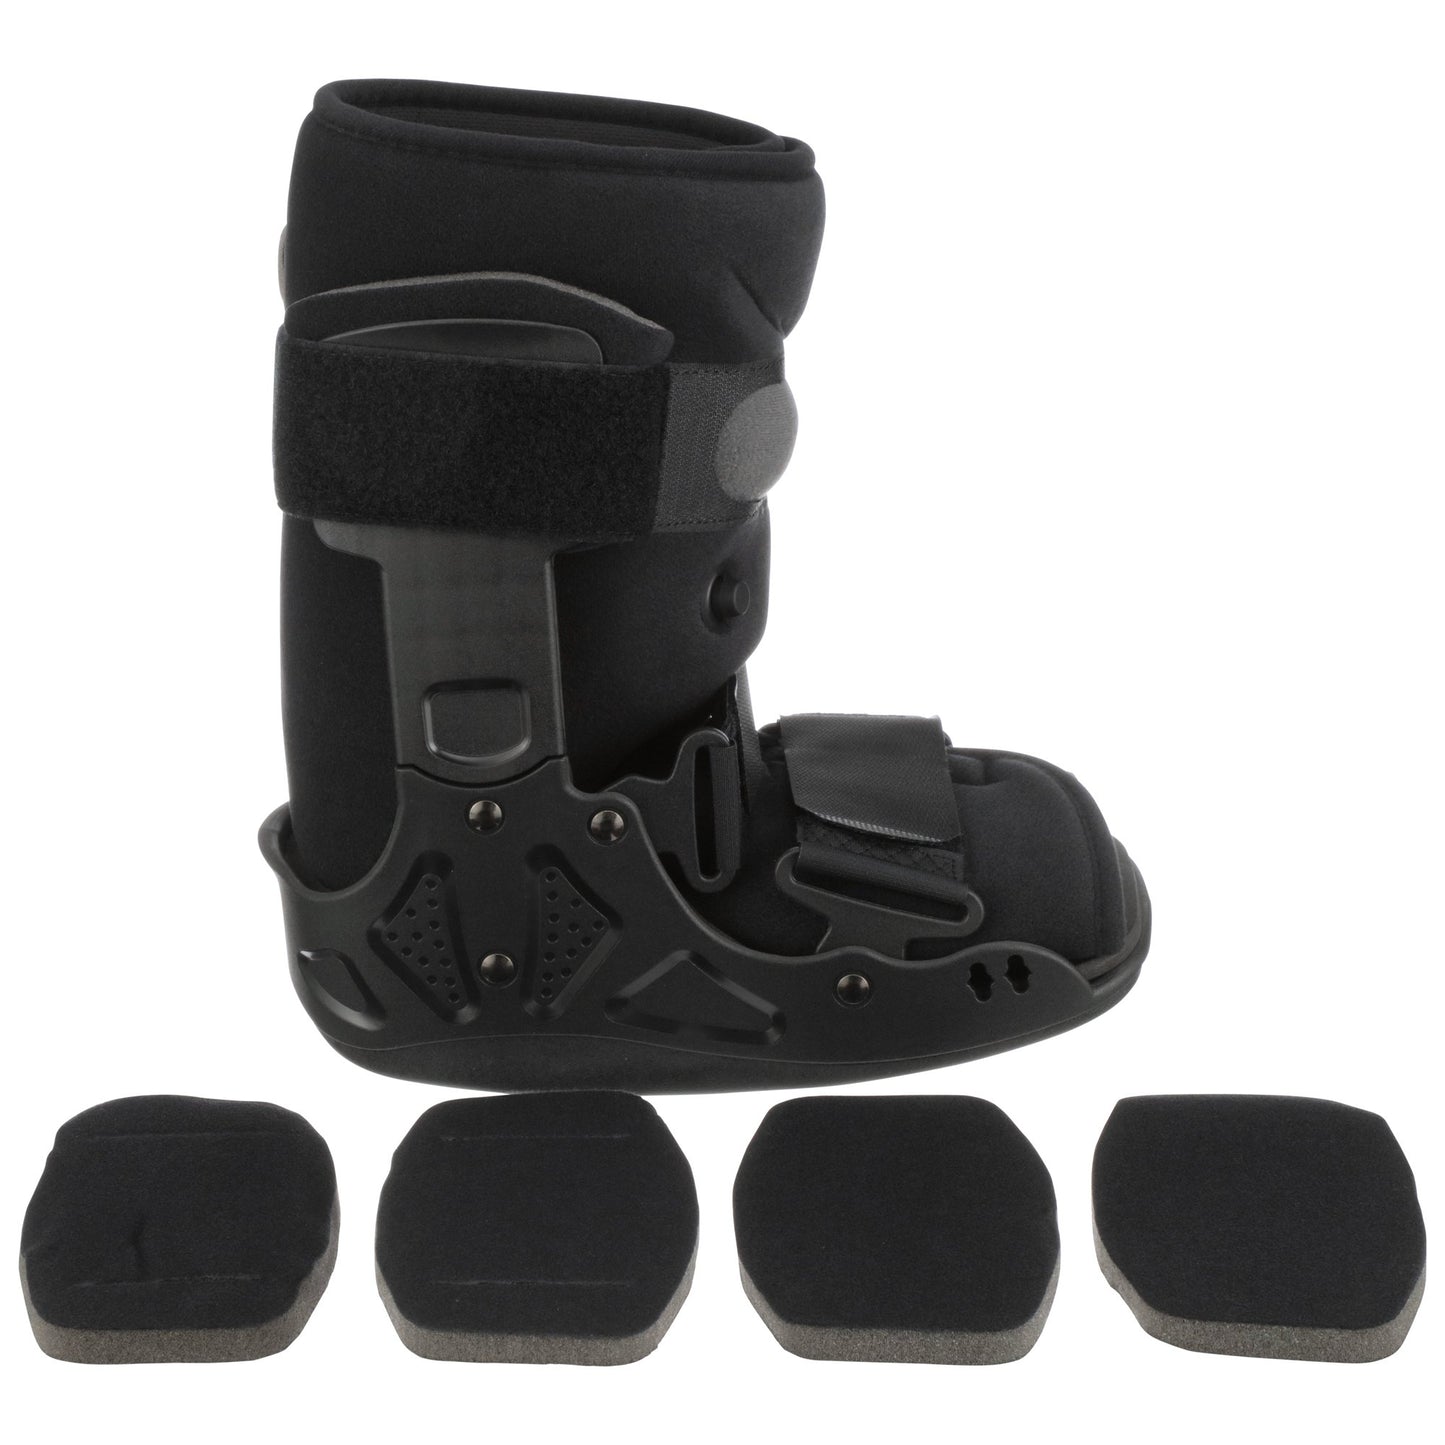 McKesson Pneumatic / Adjustable Air Support Walker Boot, Low Top, Small